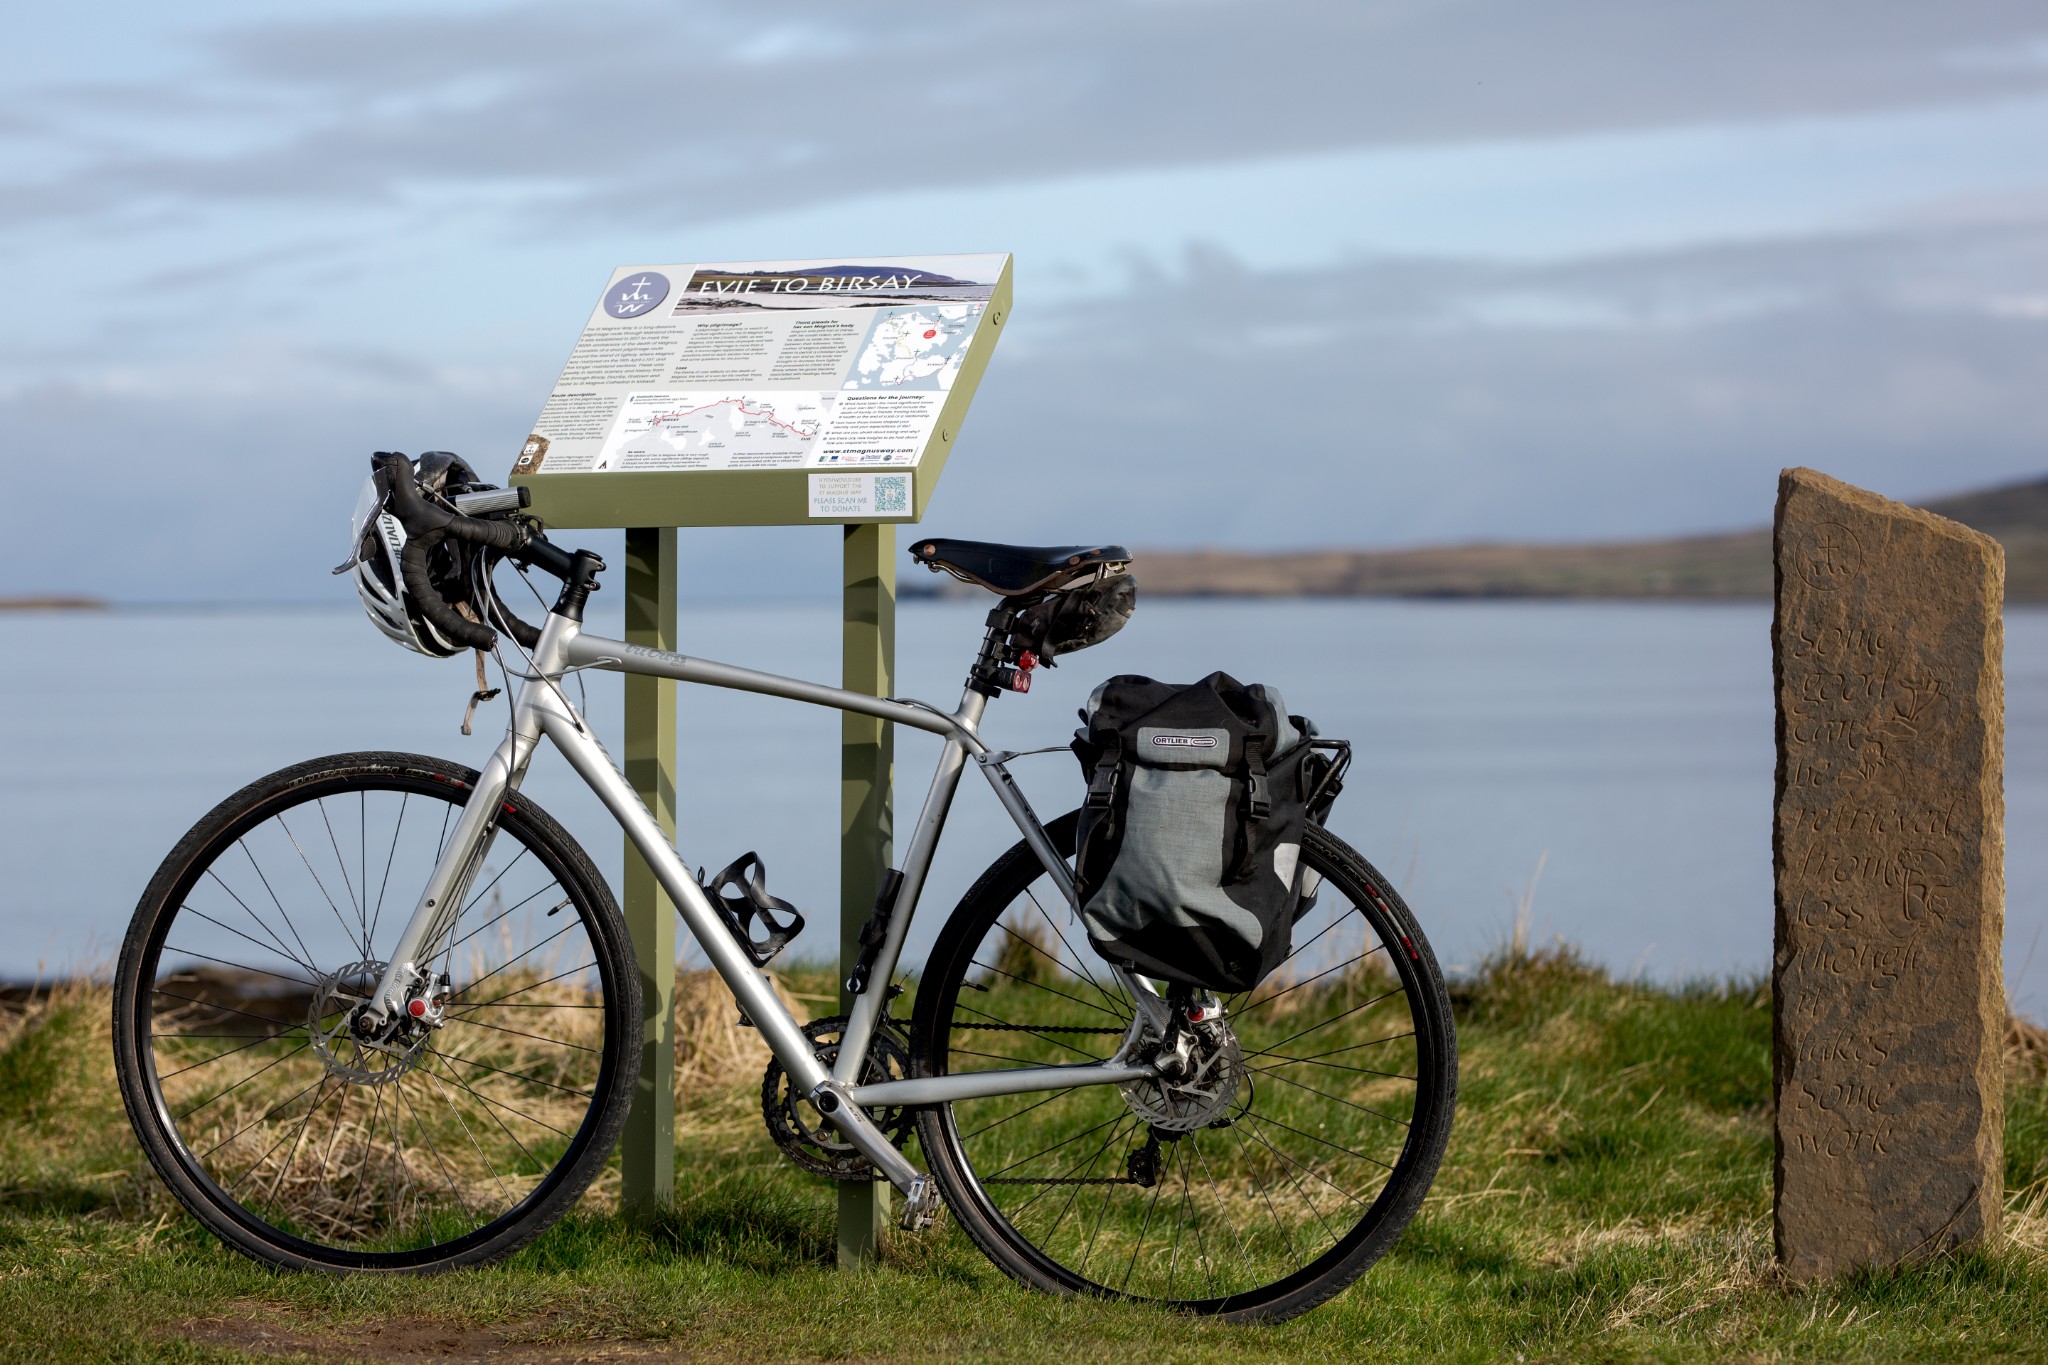 At the beginning of the St Magnus Way cycle route